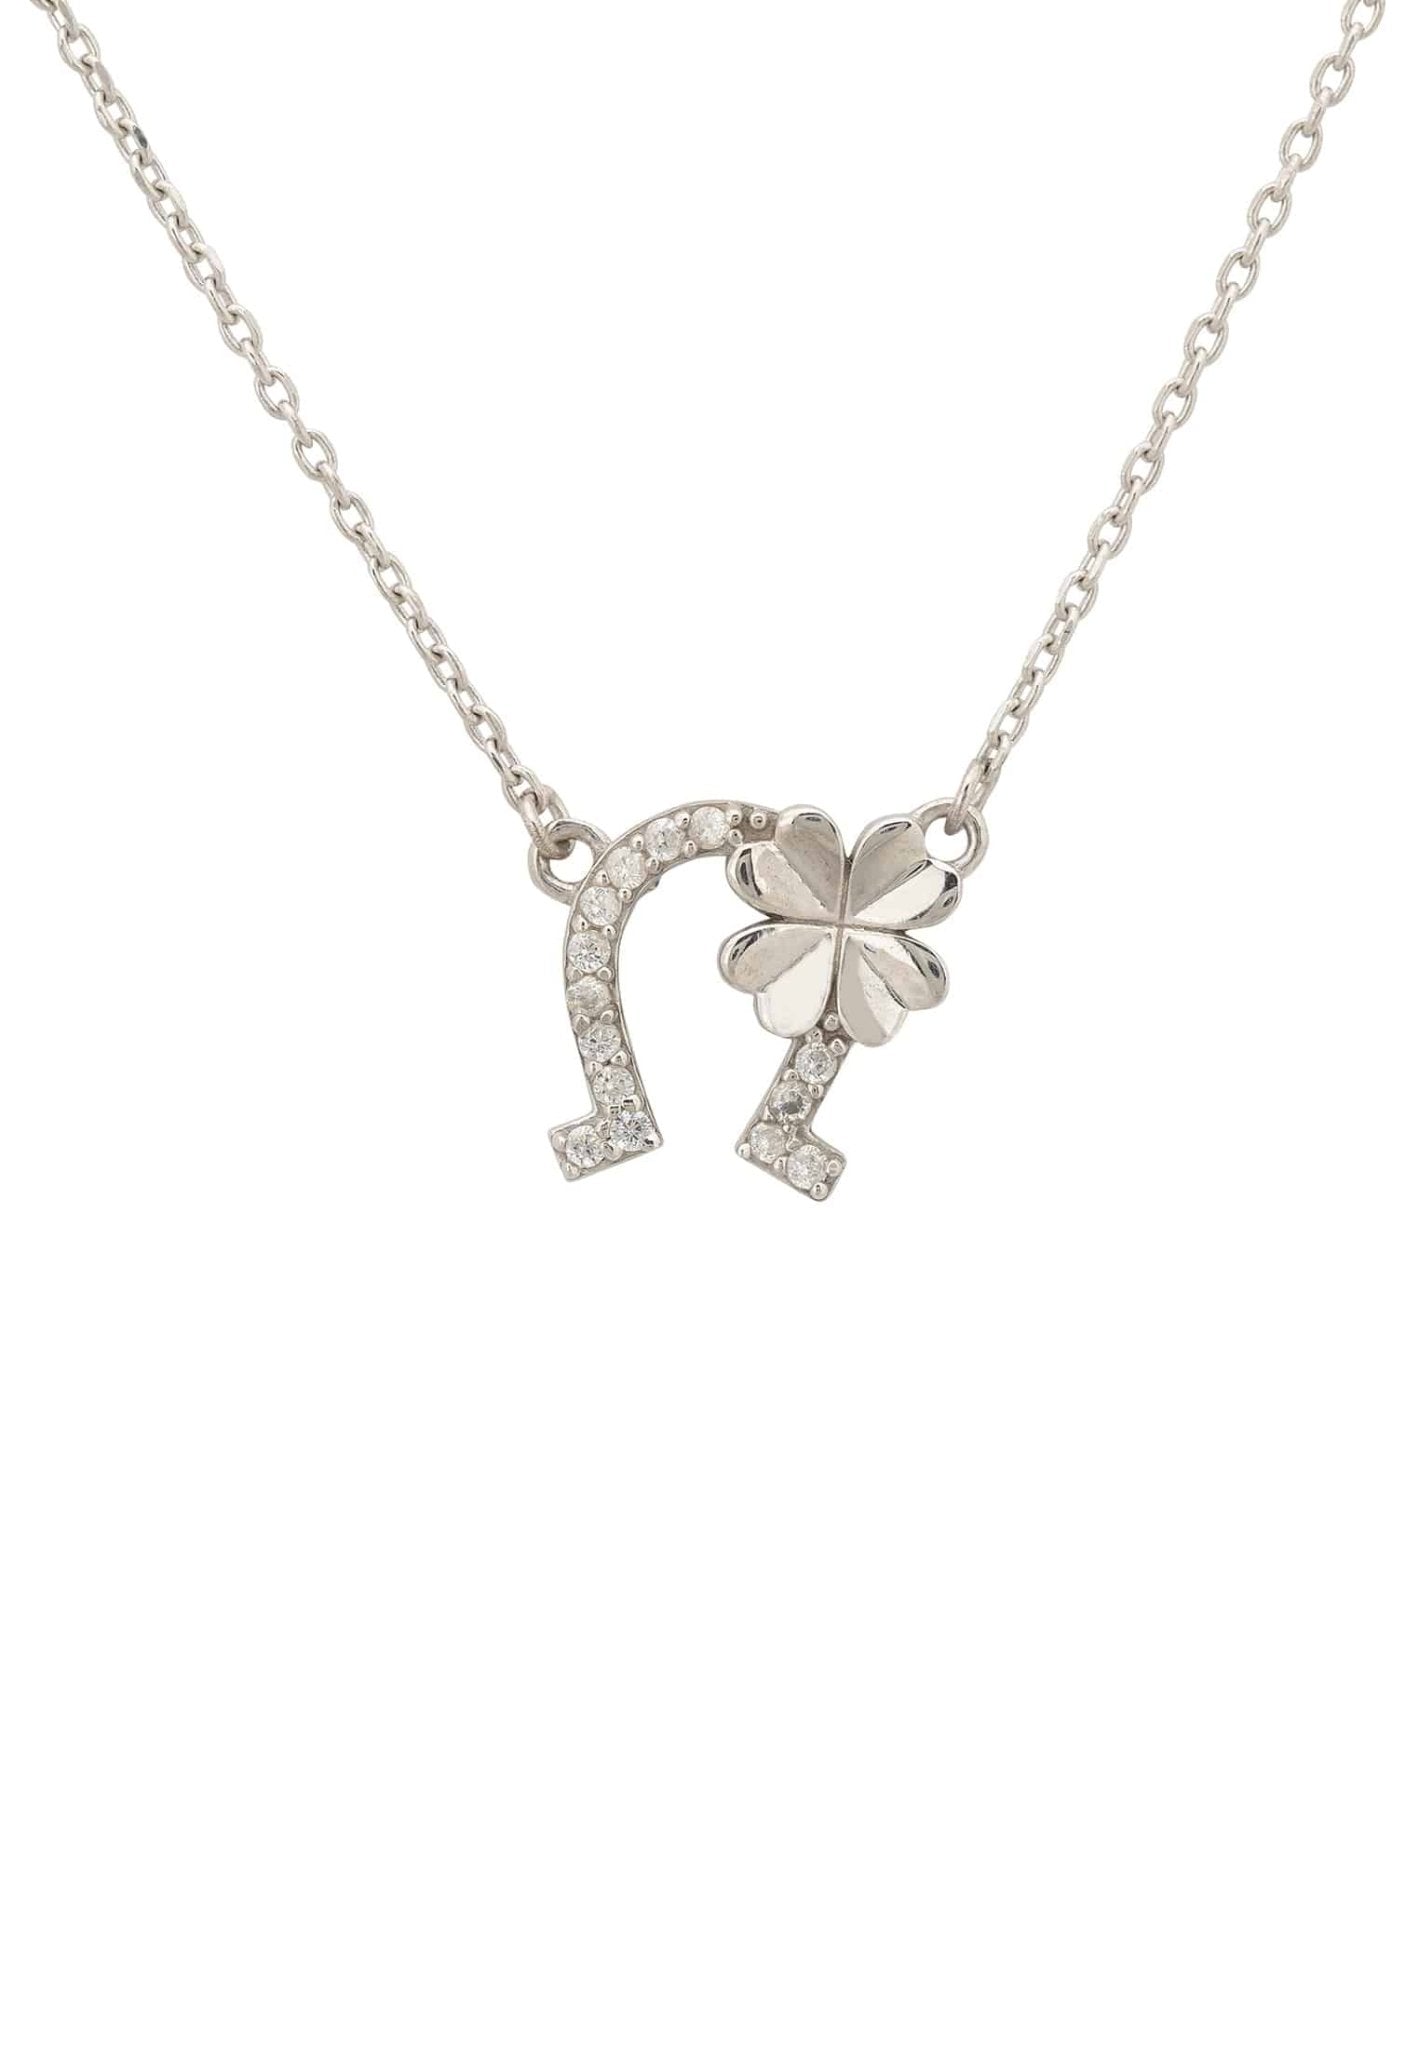 Lucky Clover Floral Charms Women's Necklace in Silver/ Rose Gold| Eunoia SELECTS Gold / White